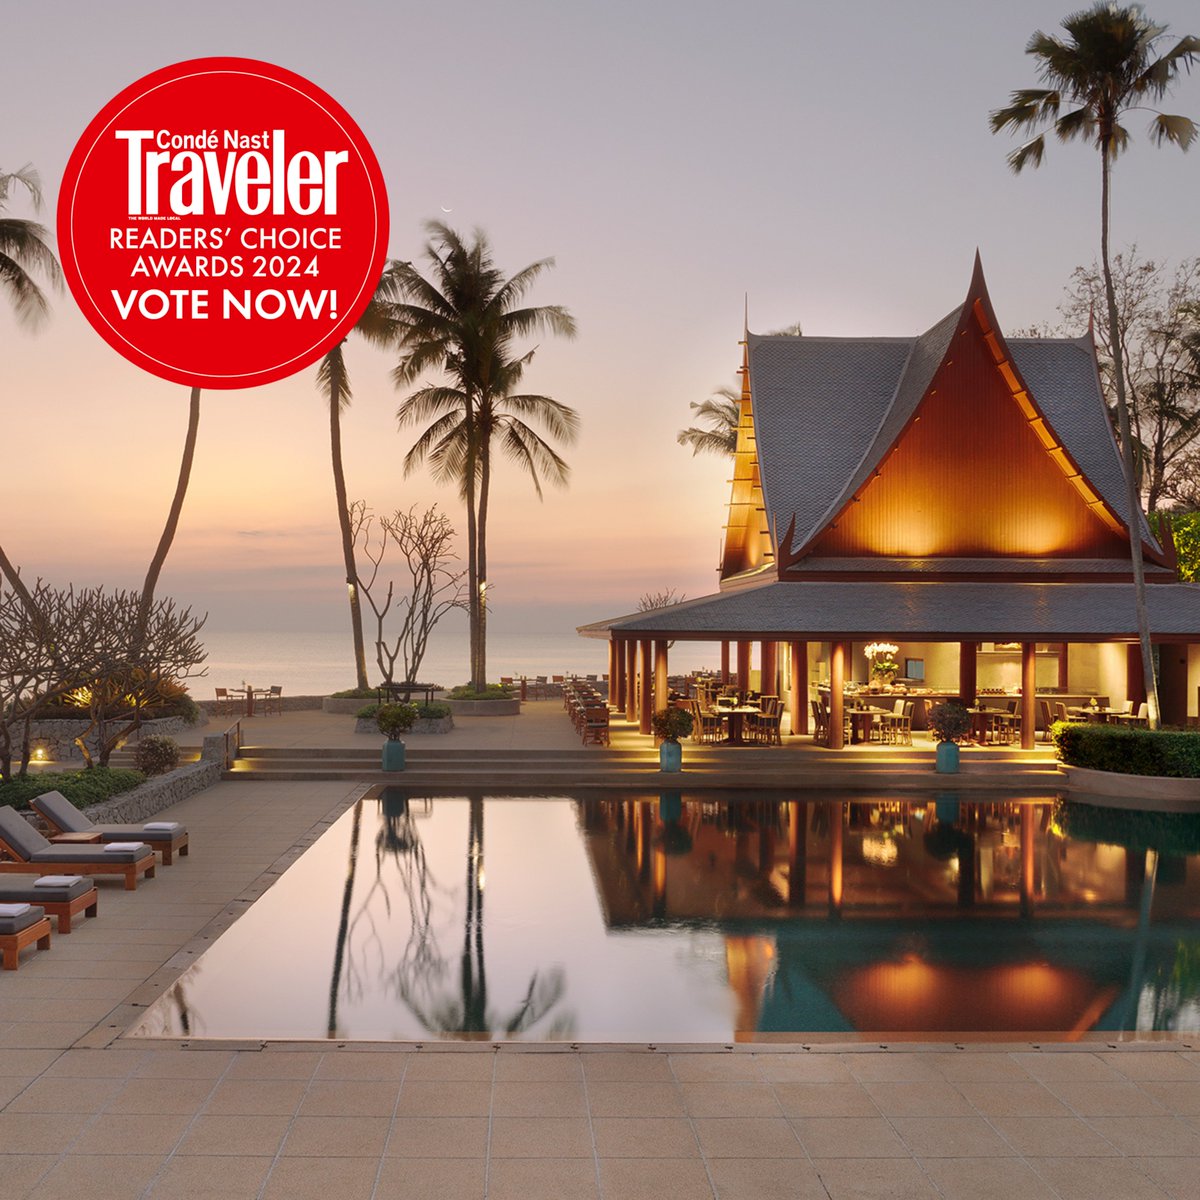 We are delighted to announce that #ChivaSomHuaHin has been nominated for the 'Best Destination Spas' category in the 2024 #CondéNastTraveler Readers' Choice Awards.  

Vote for us: condenast-interactive.typeform.com/to/VcOLOEo3

#CondeNastAwards #ReadersChoice #DestinationSpa #WorldsBestSpa